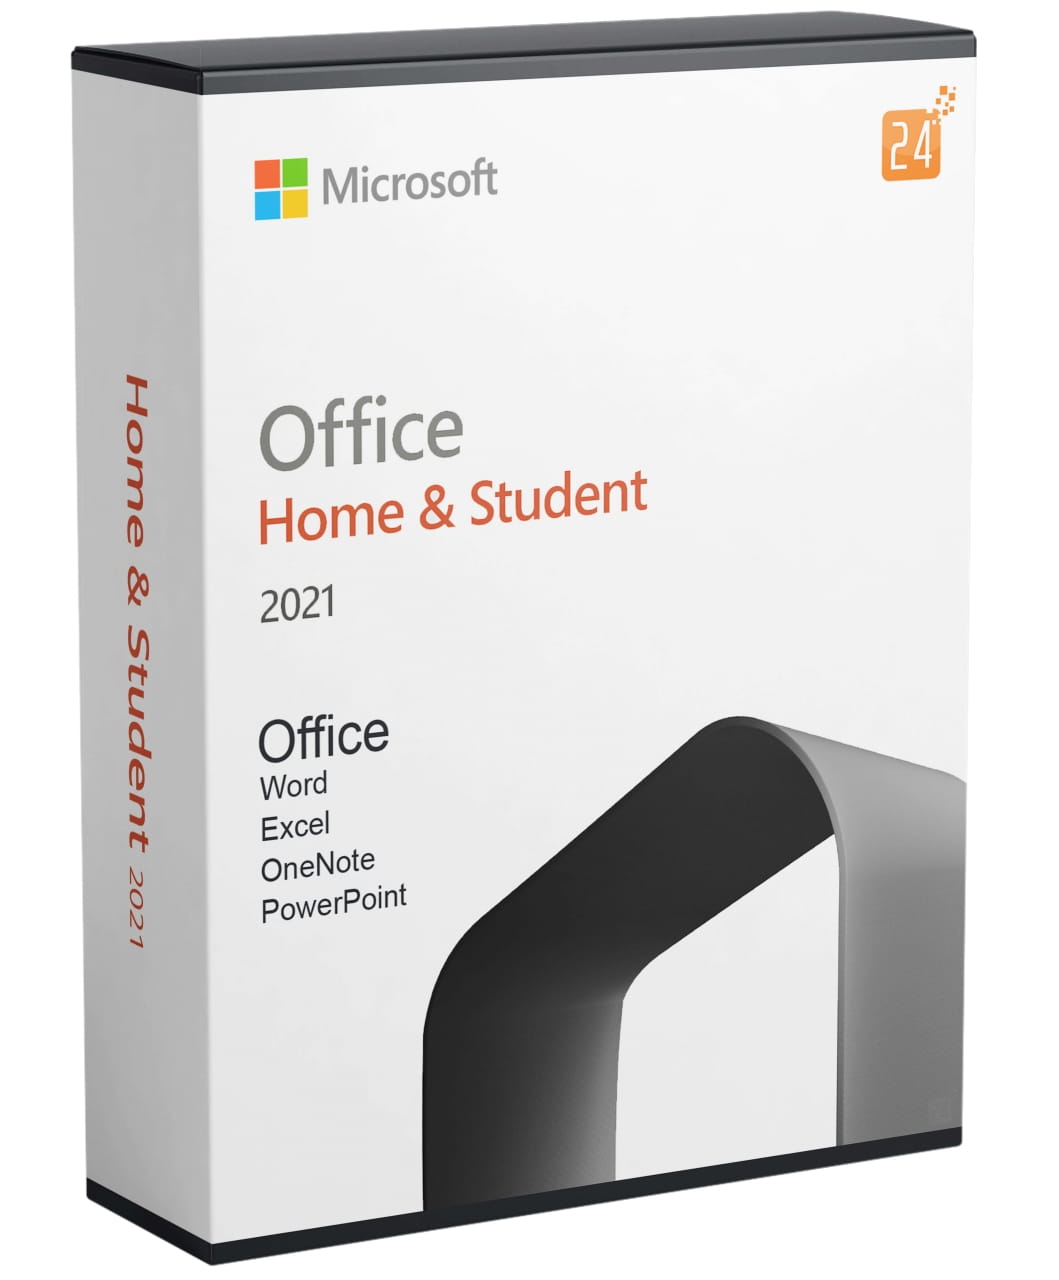 microsoft co microsoft off 2021 home and student mac os ice